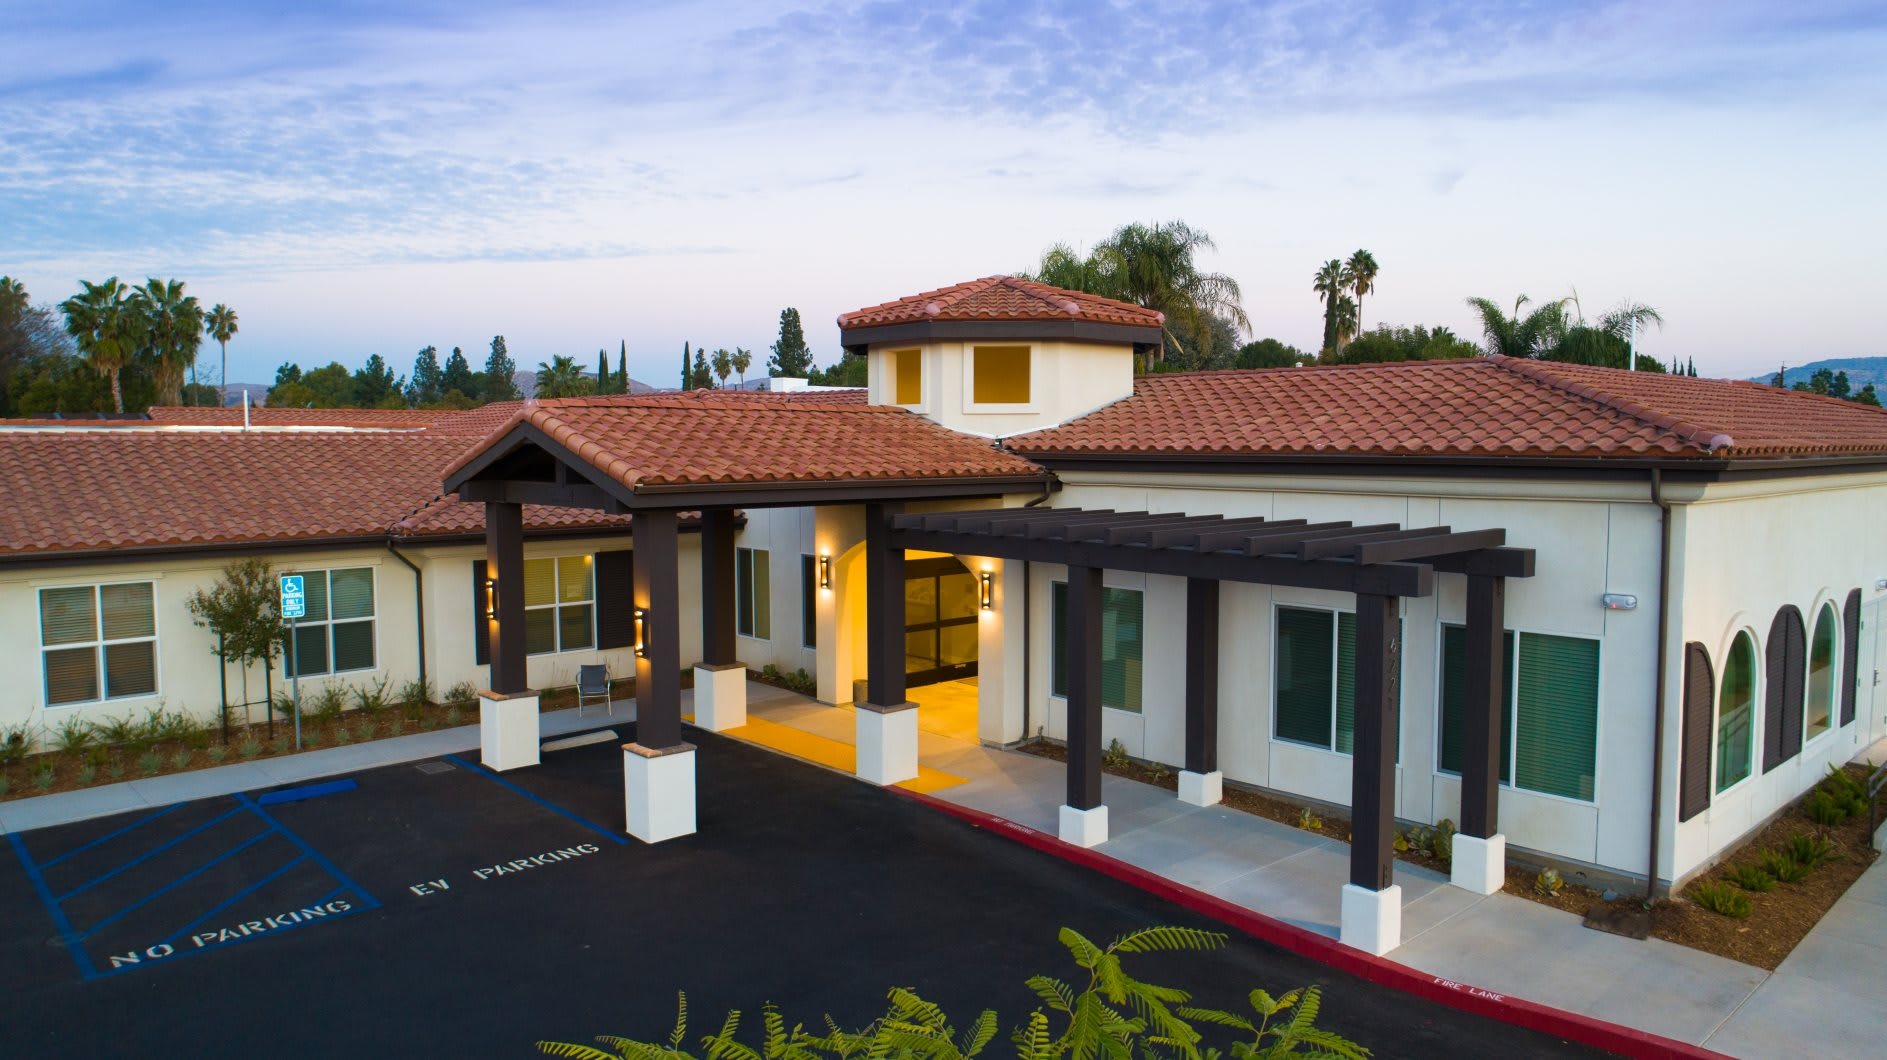 The Preserve at Woodland Hills Assisted Living and Memory Care community exterior